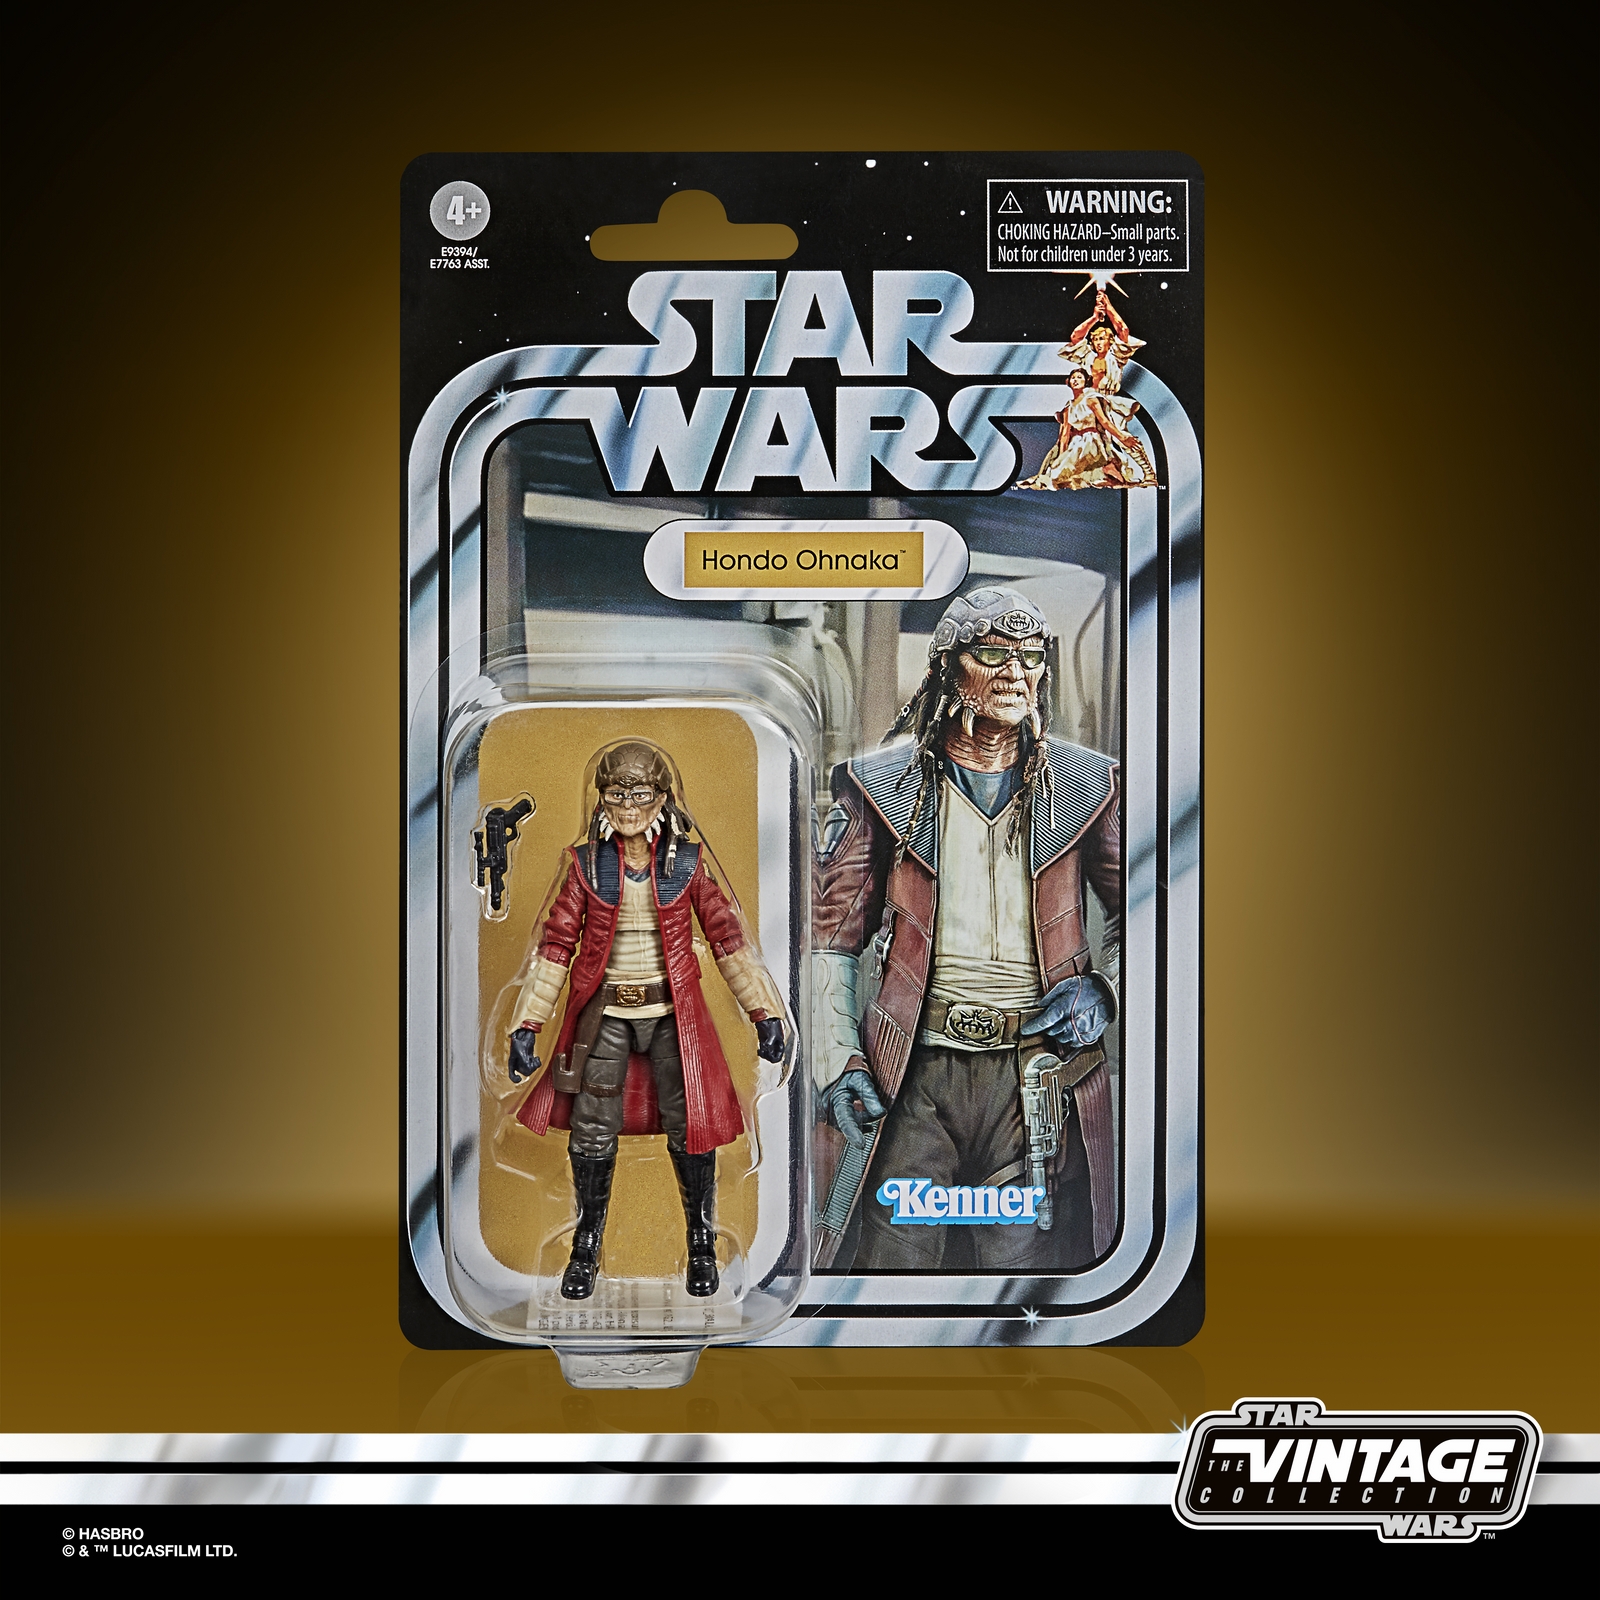 STAR WARS THE VINTAGE COLLECTION 3.75-INCH HONDO OHNAKA Figure - in pck.jpg